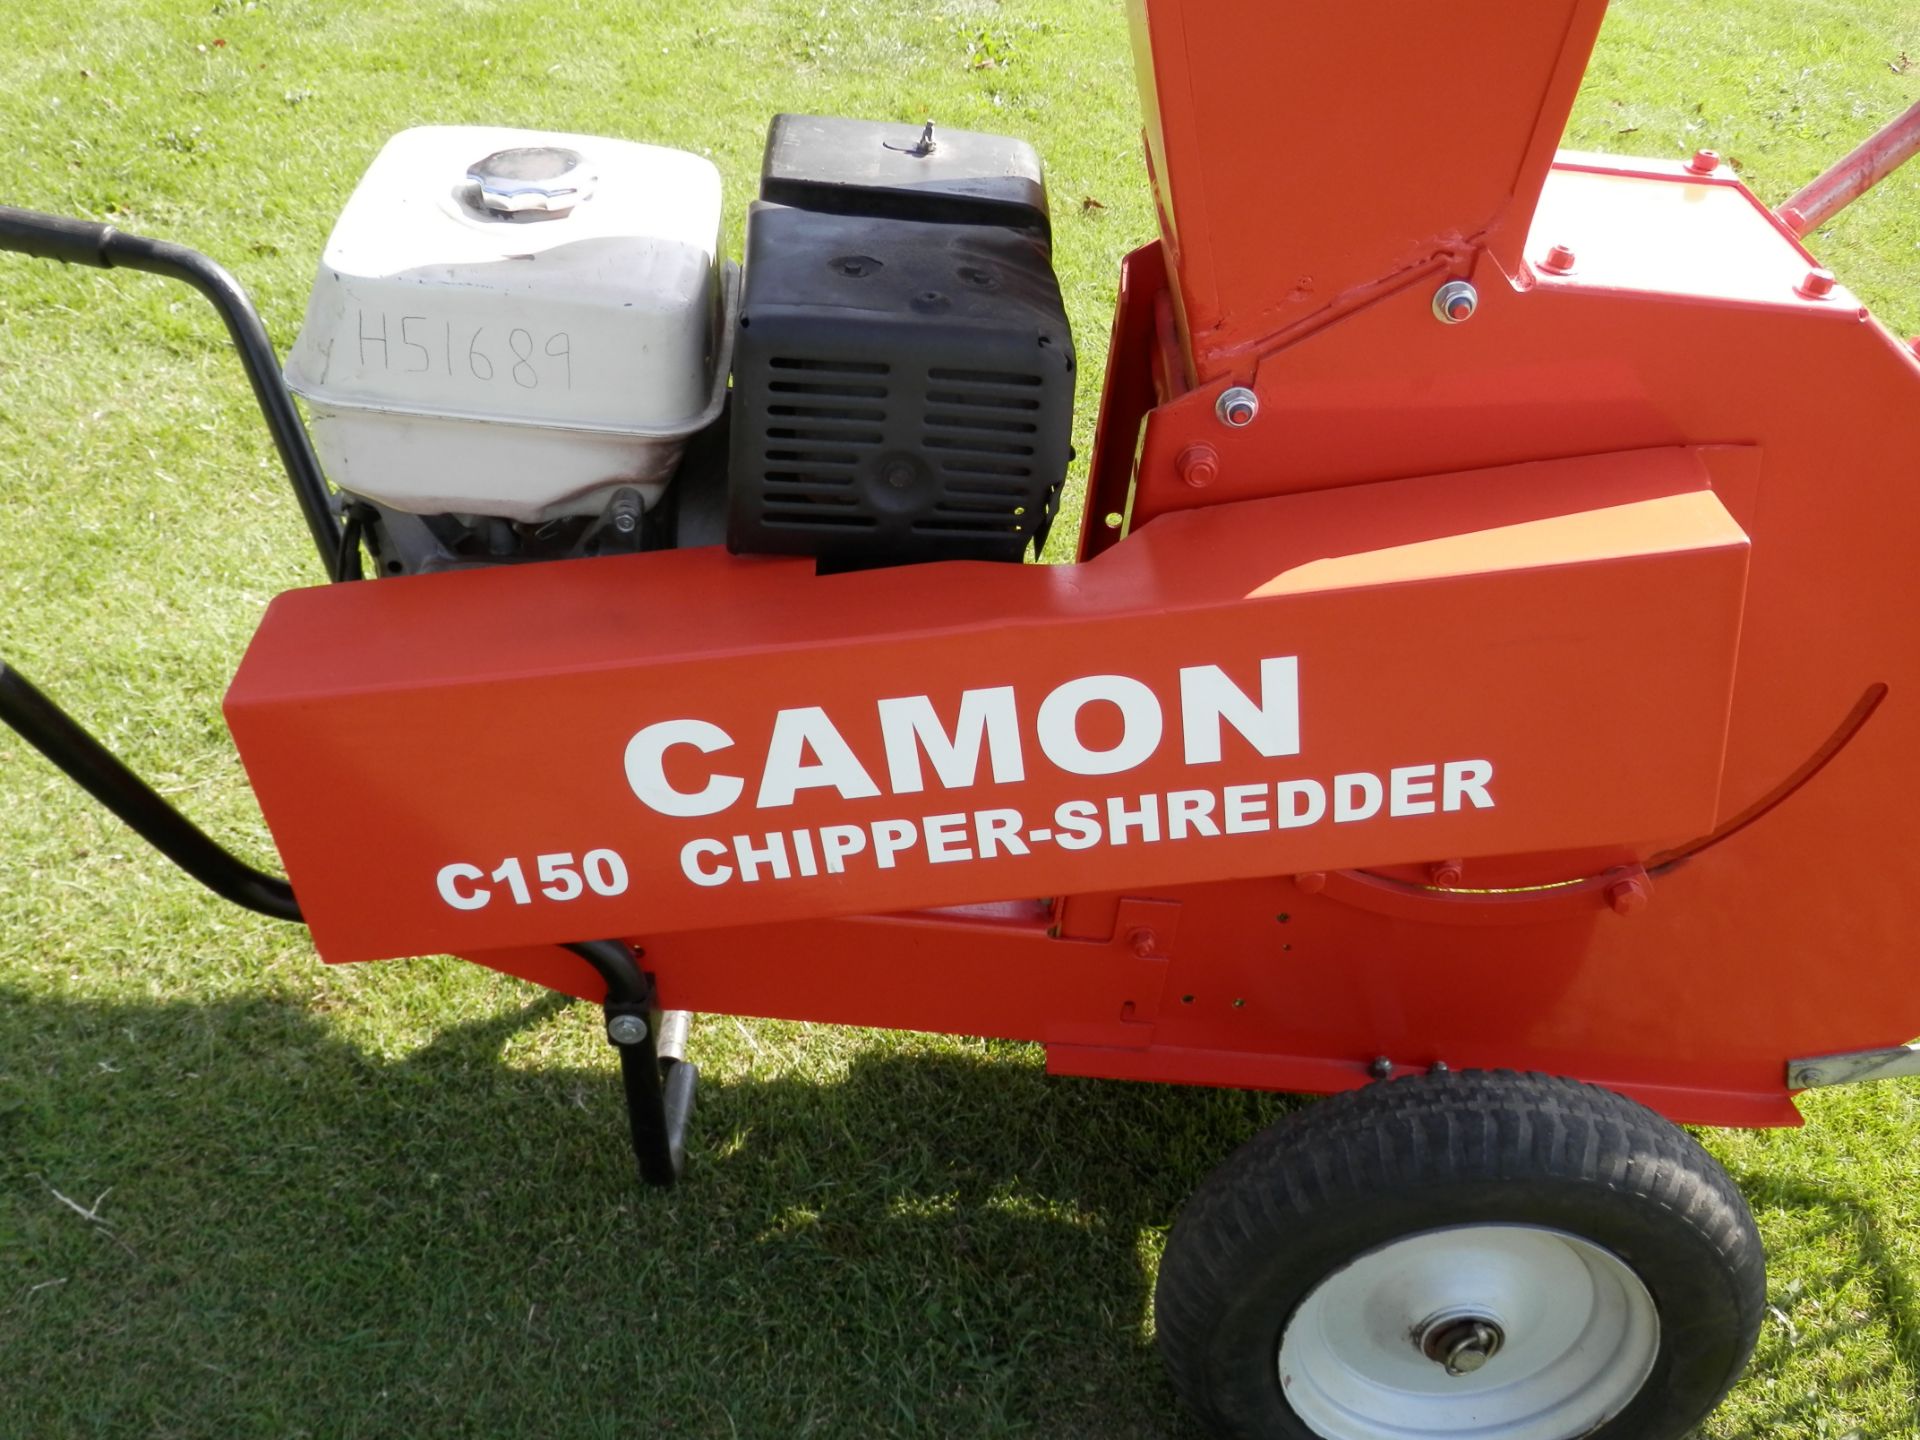 SUPERB CAMON C150 3.5" PETROL POWERED WOOD CHIPPER 13HP HONDA ENGINE, TESTED & WORKING WELL - Image 4 of 6